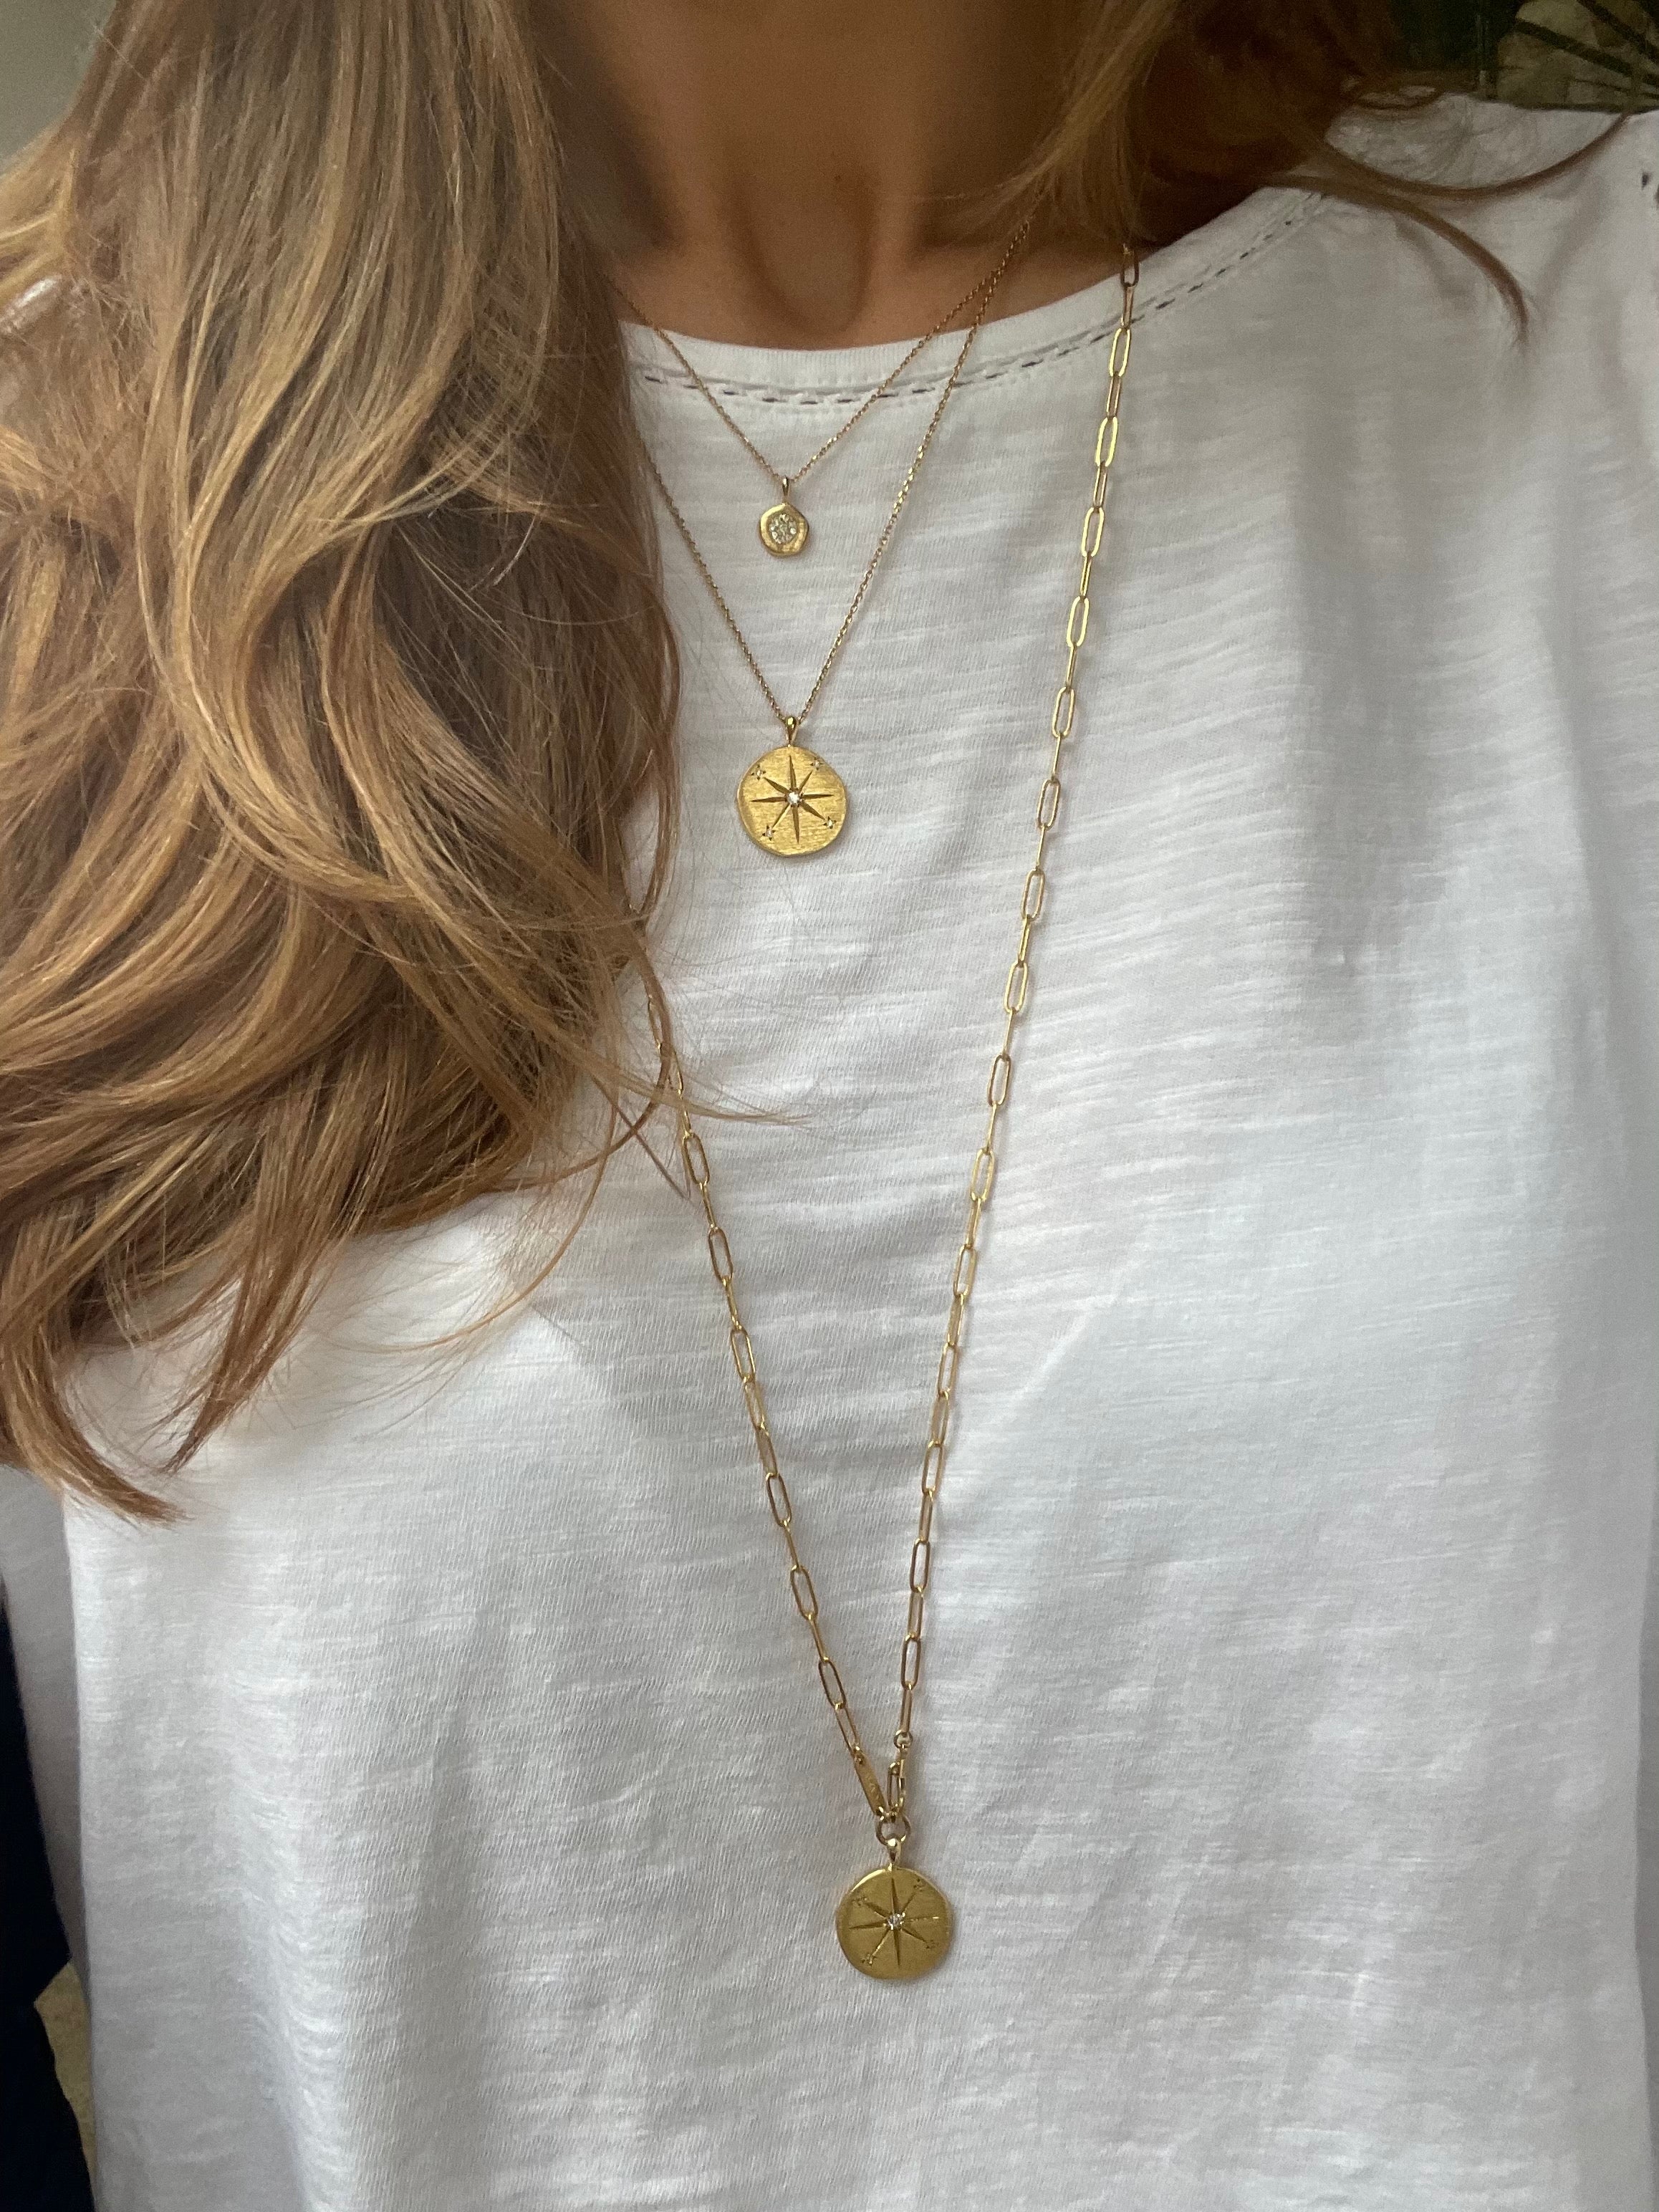 long gold link chain necklace with sun medallion